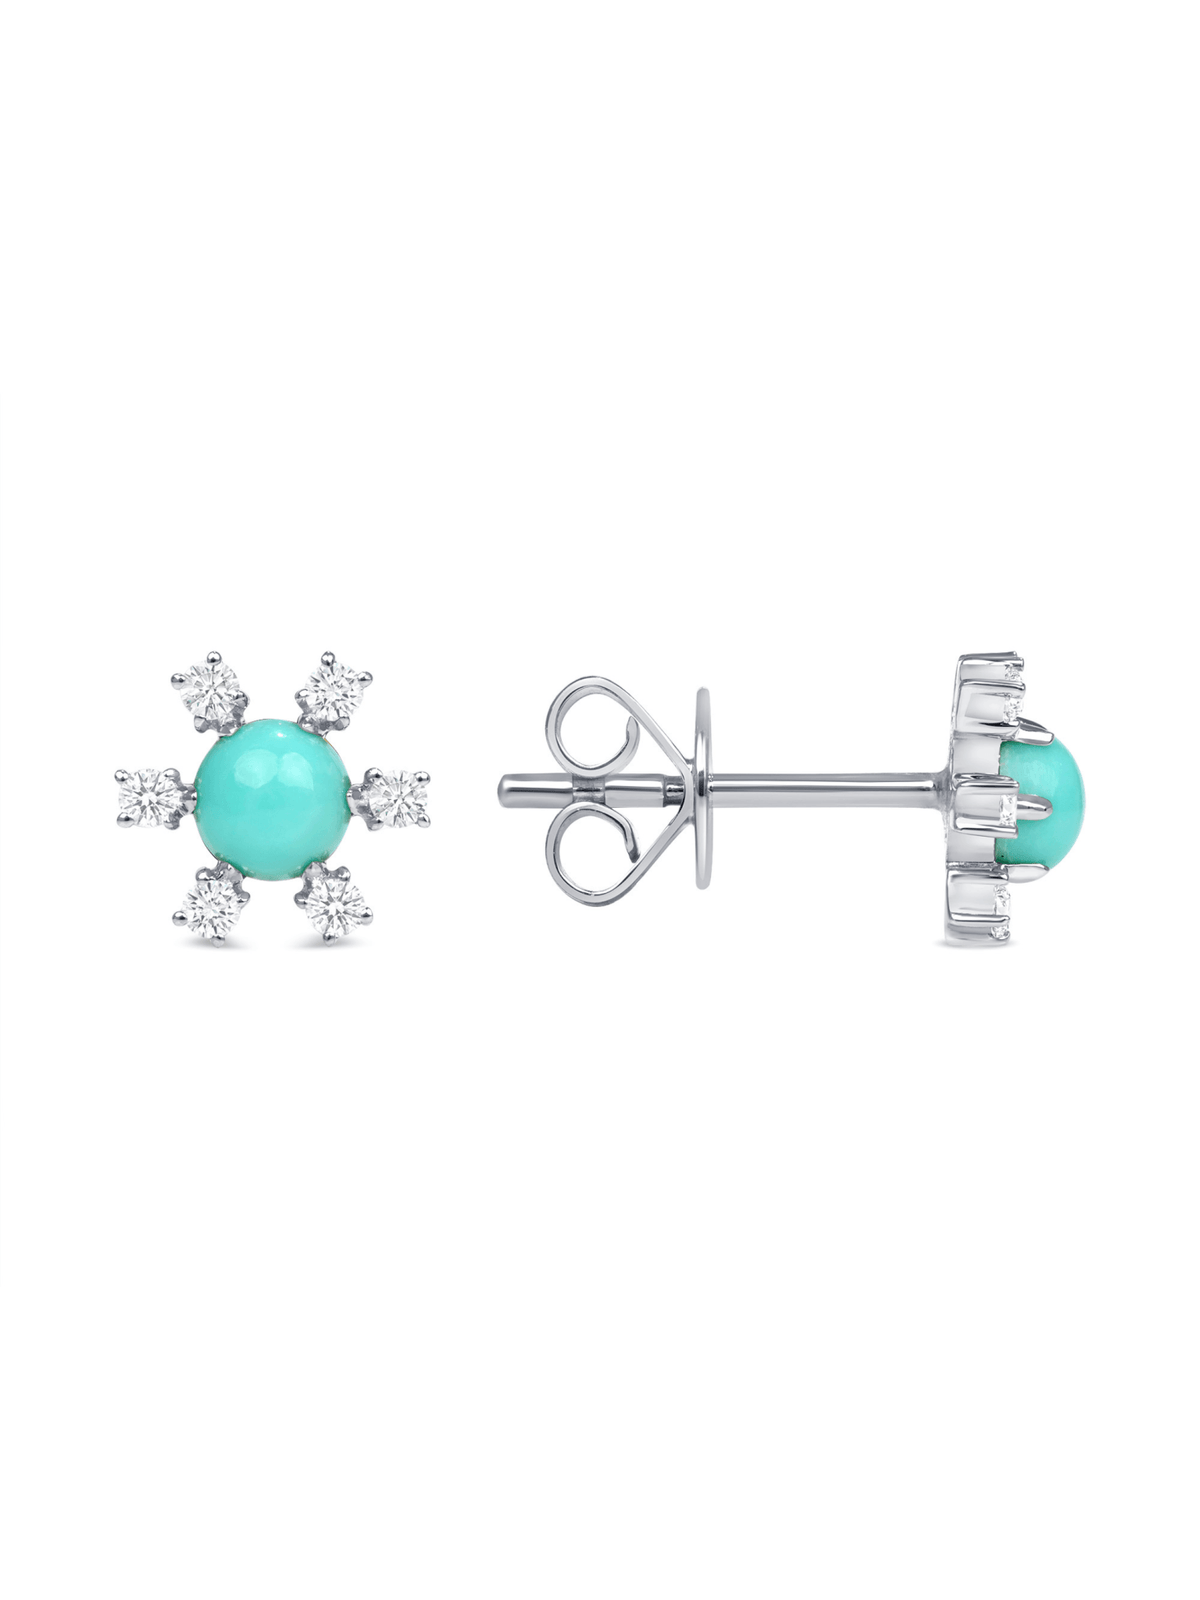 Turquoise earrings with diamonds white gold on white background